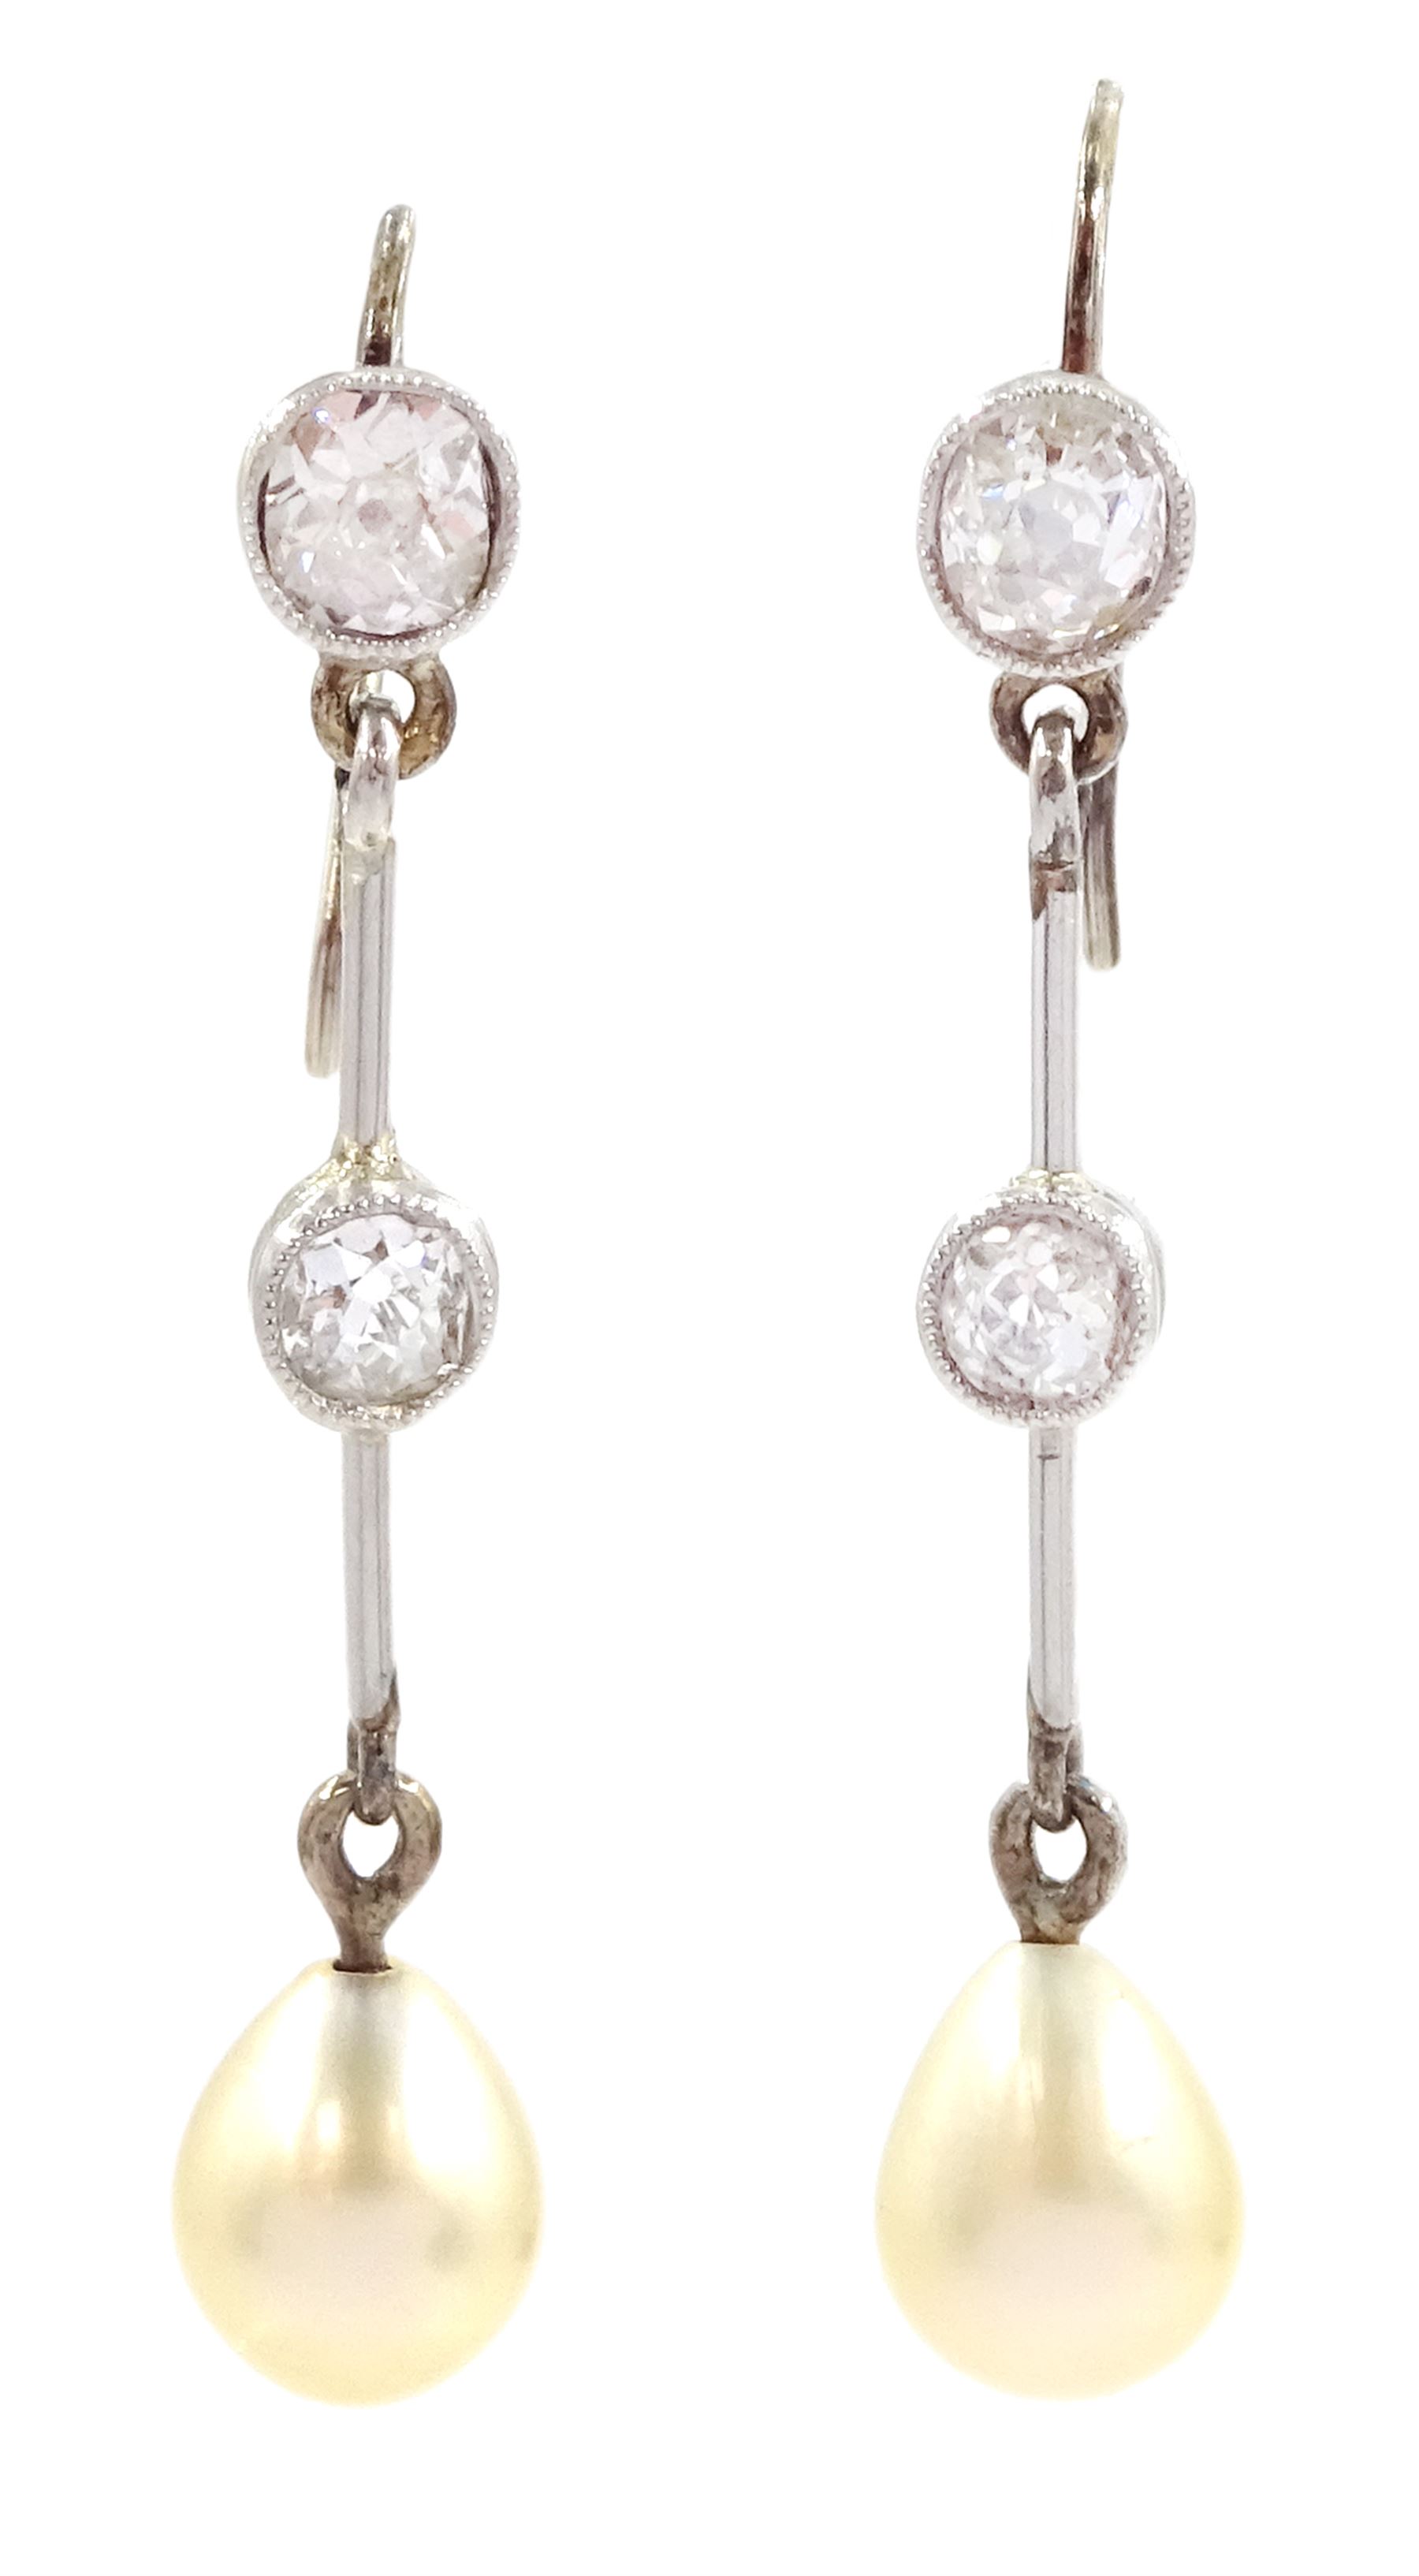 Pair of gold and platinum early 20th century old cut diamond and pearl pendant earrings